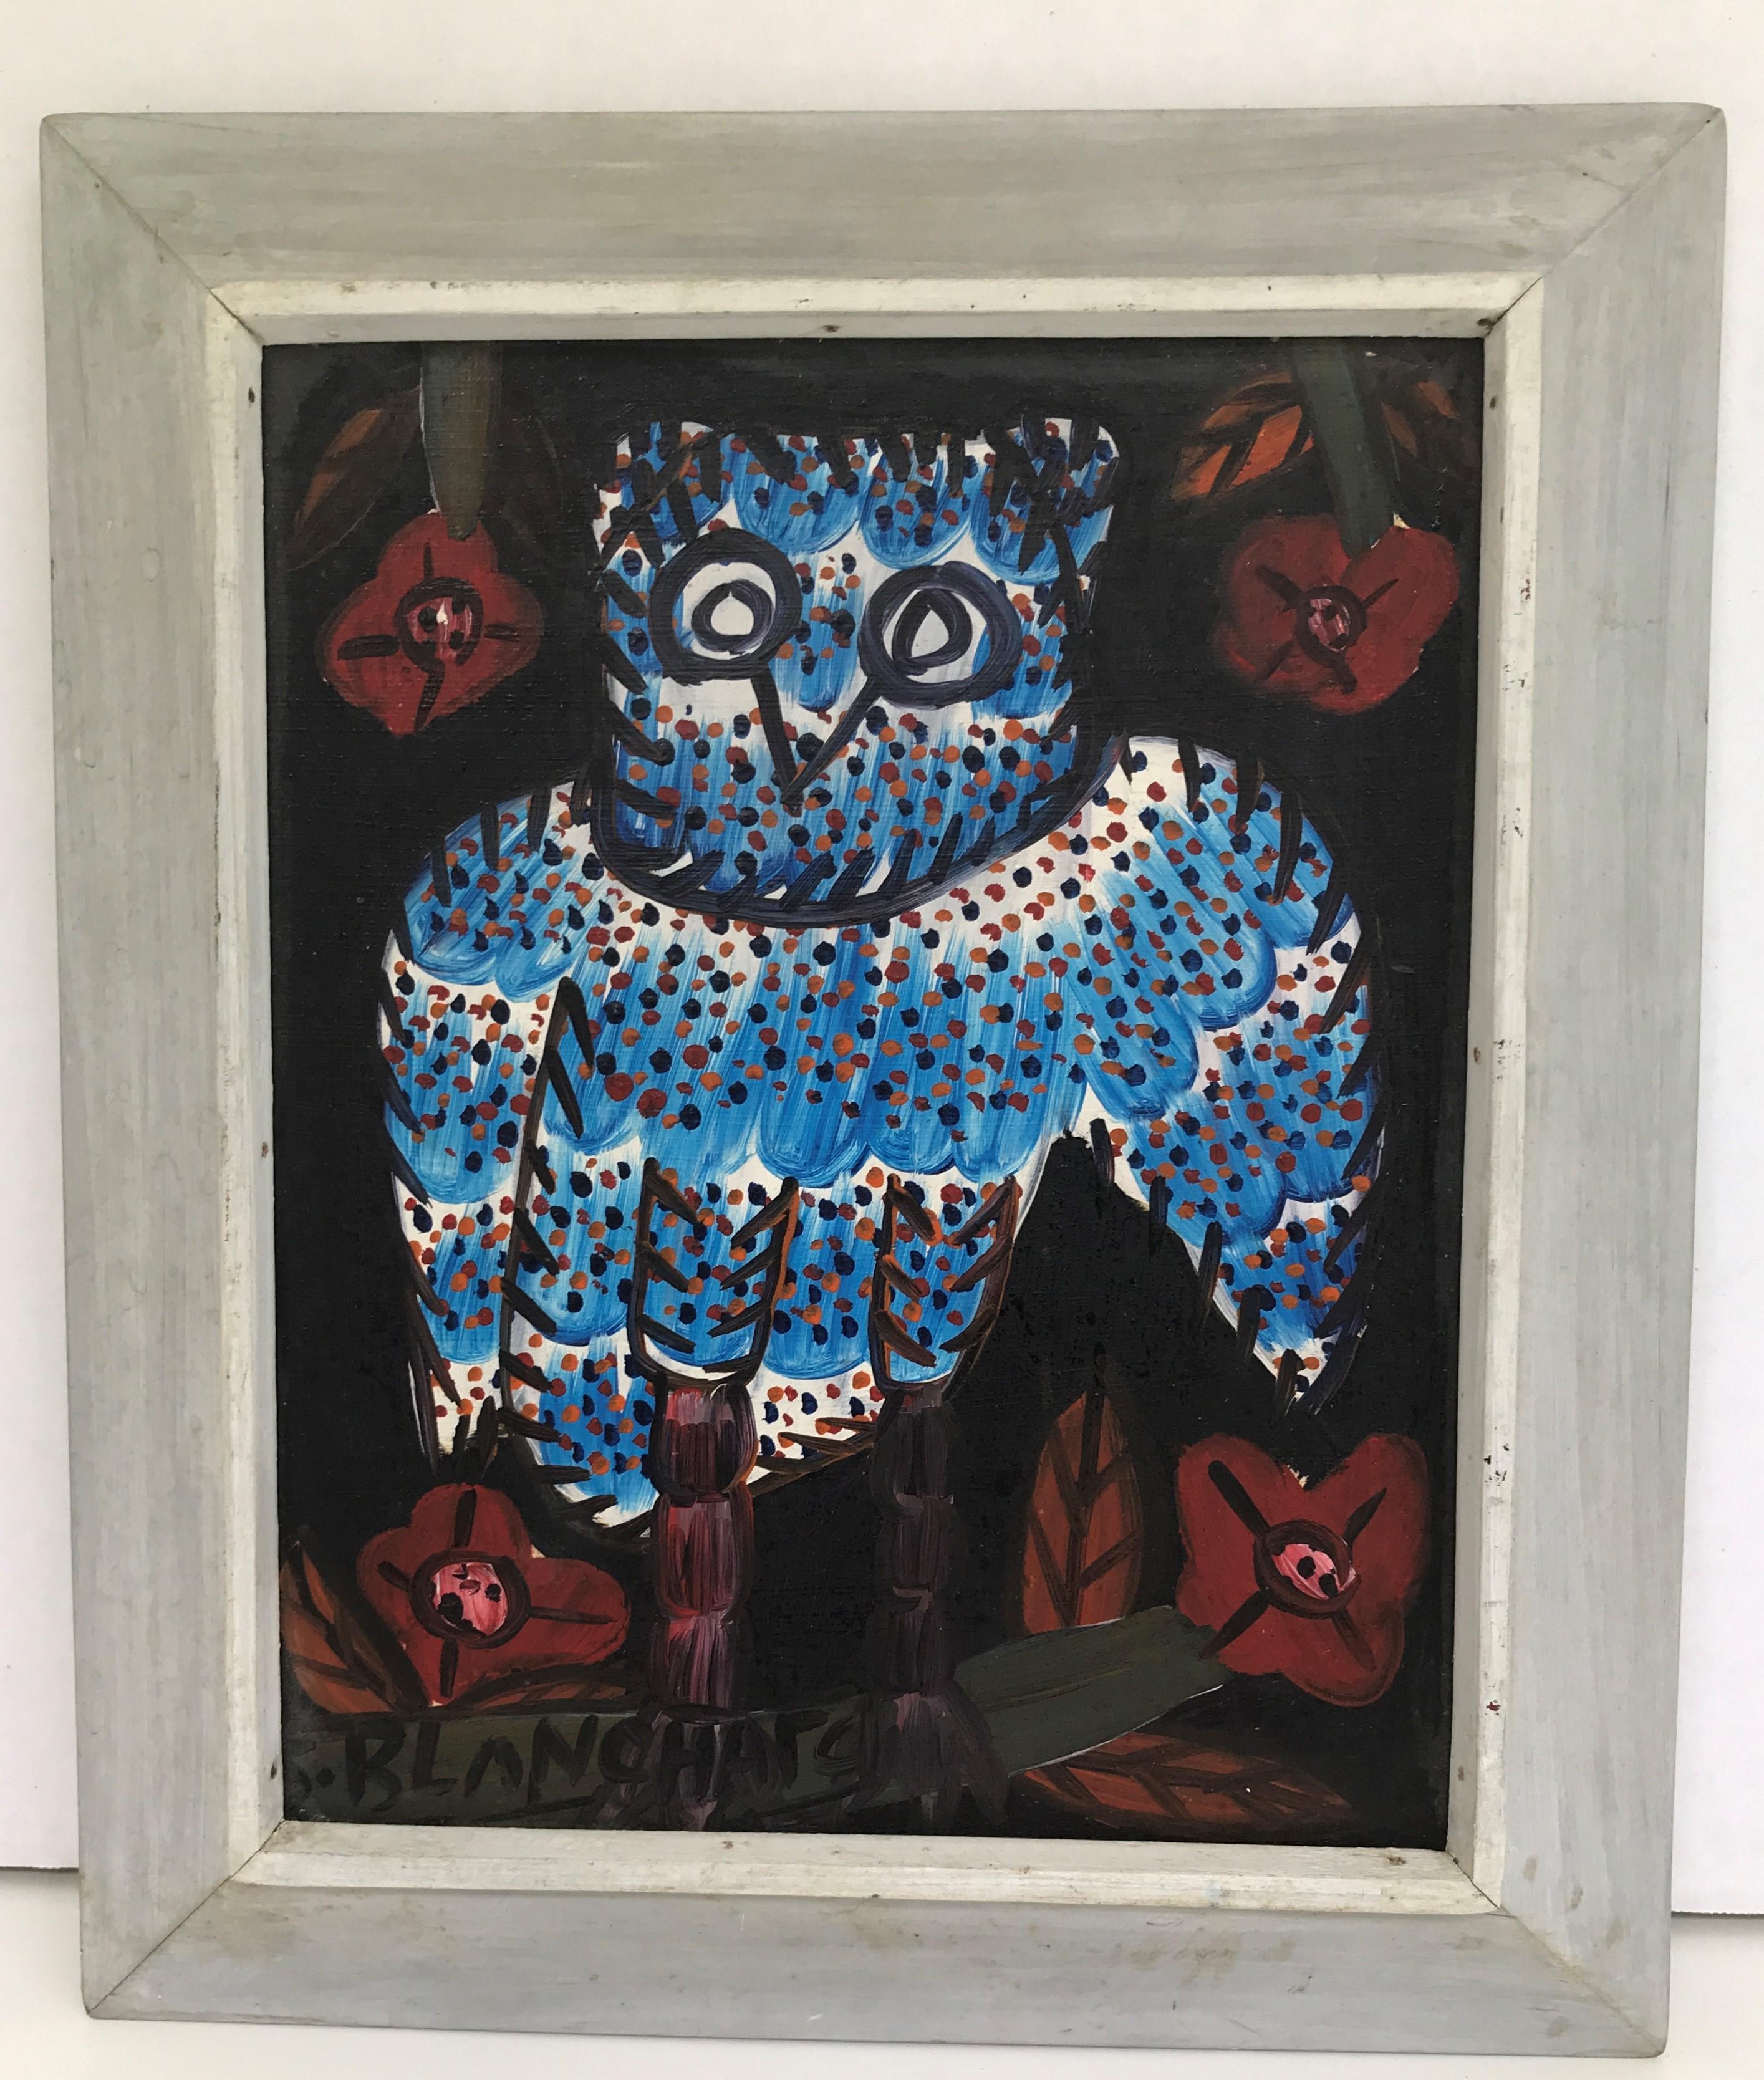 REDUCED from $680.....Noted listed Haitian painter, Sisson Blanchard (1929-1981) blue owl – Oil on Masonite with original frame circa 1970 Haitian Art.

Born in 1929 in the small southern Haiti village of Trouin, Sisson Blanchard moved to the